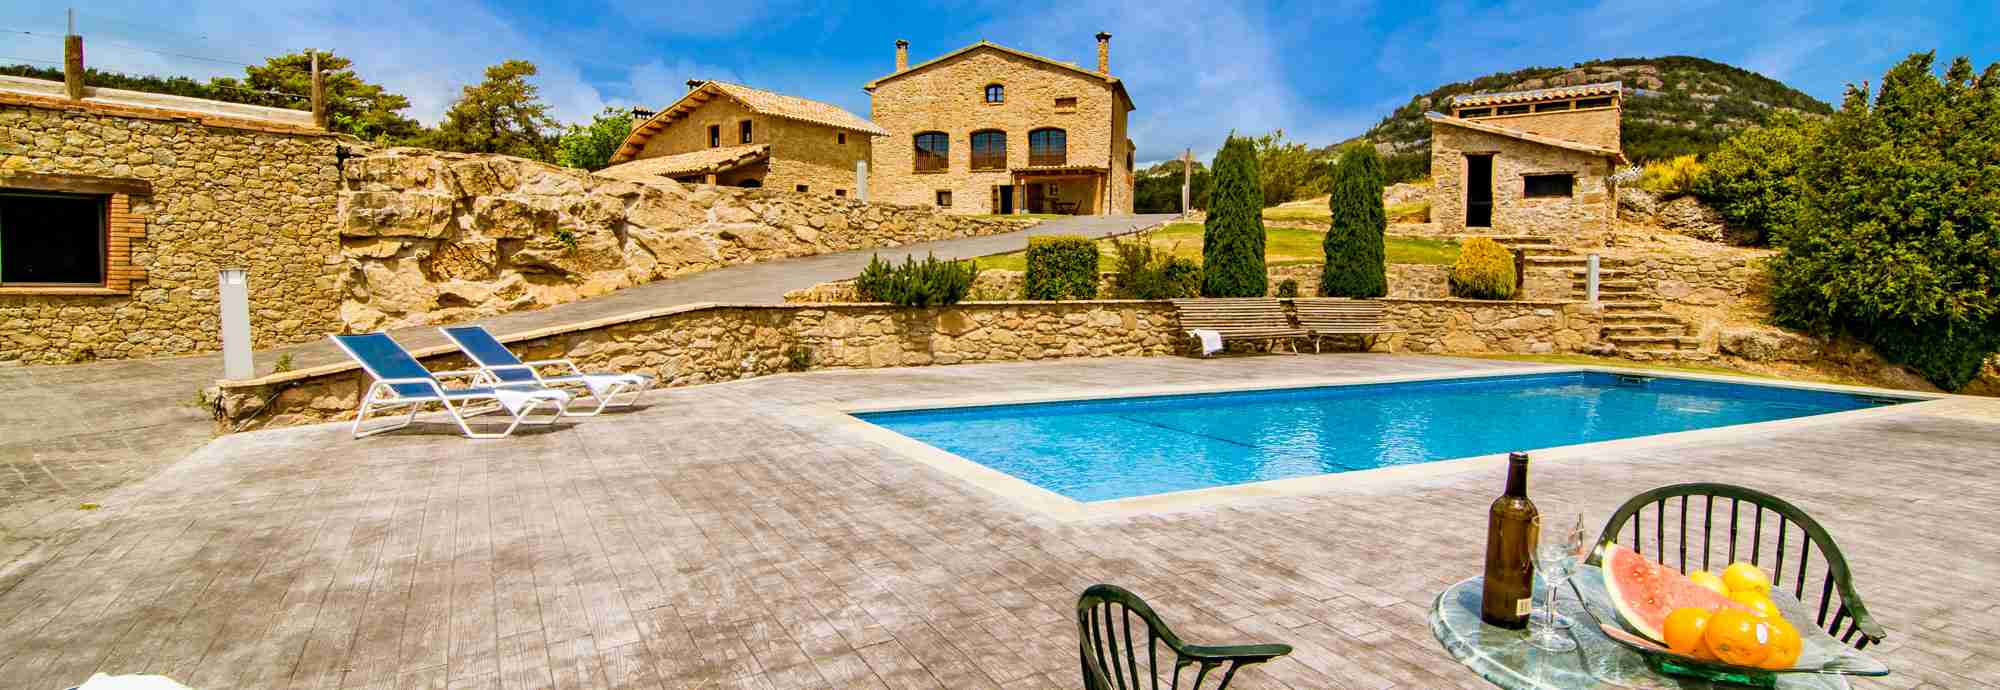 Self catering at a quality mountain estate in the Catalonia highlands